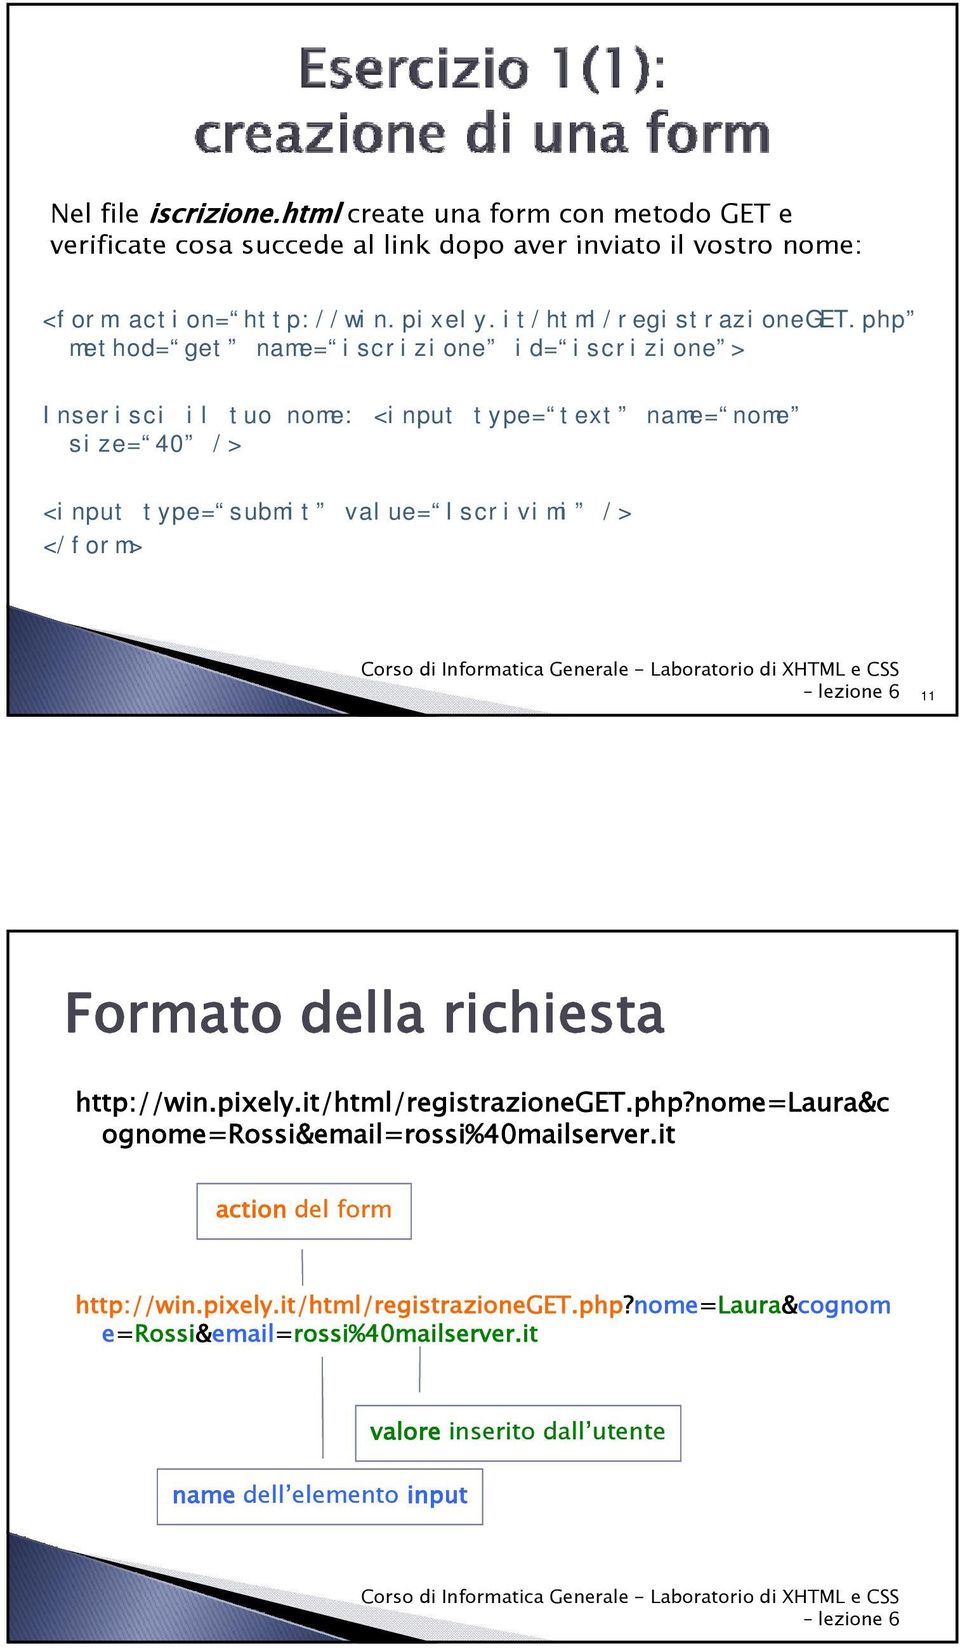 php method= get name= iscrizione id= iscrizione > Inserisci il tuo nome: <input type= text name= nome size= 40 /> <input type= submit value= Iscrivimi /> </form>